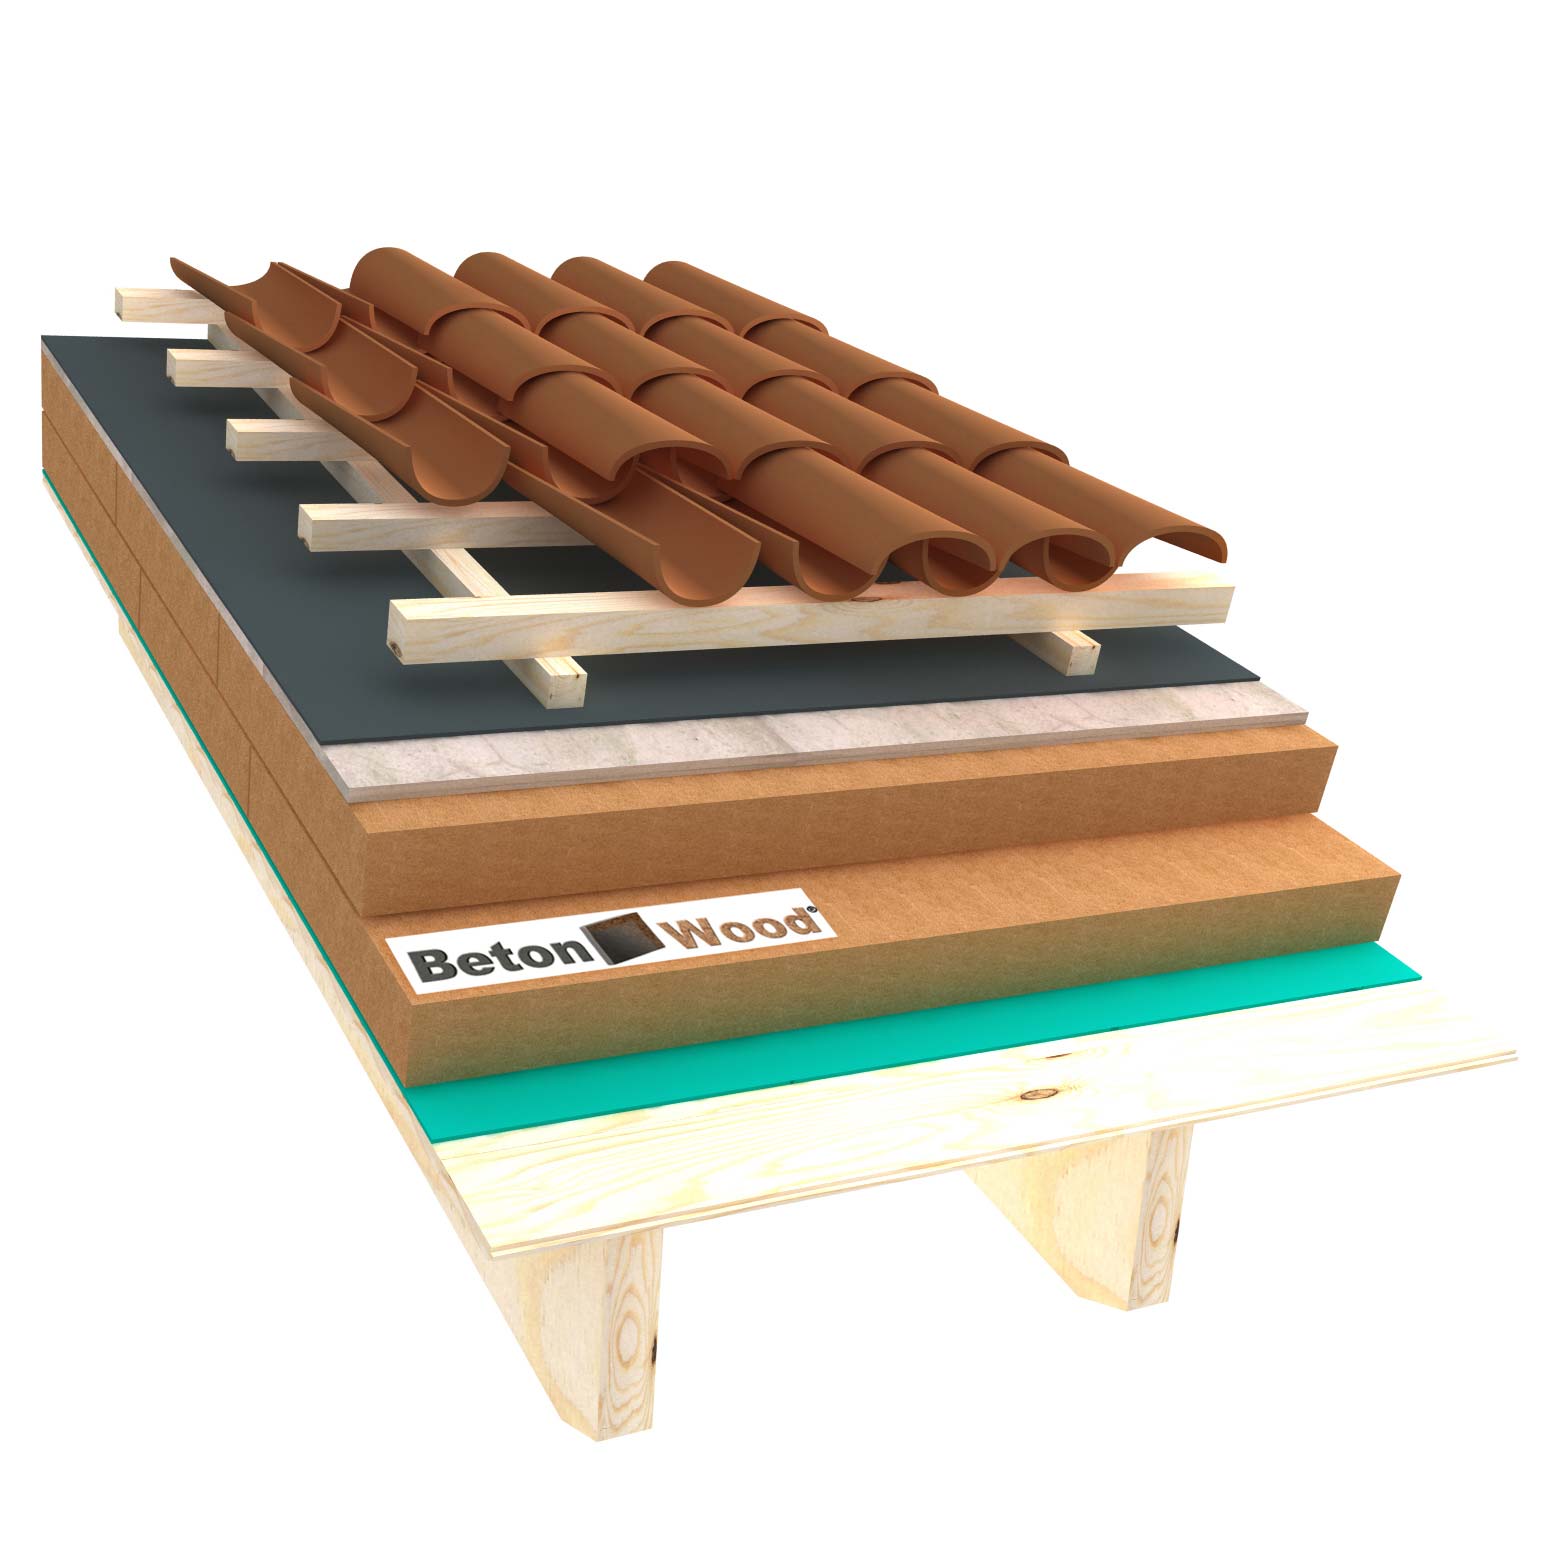 Ventilated roof with wood fiber Universal dry and cement bonded particle boards on matchboarding